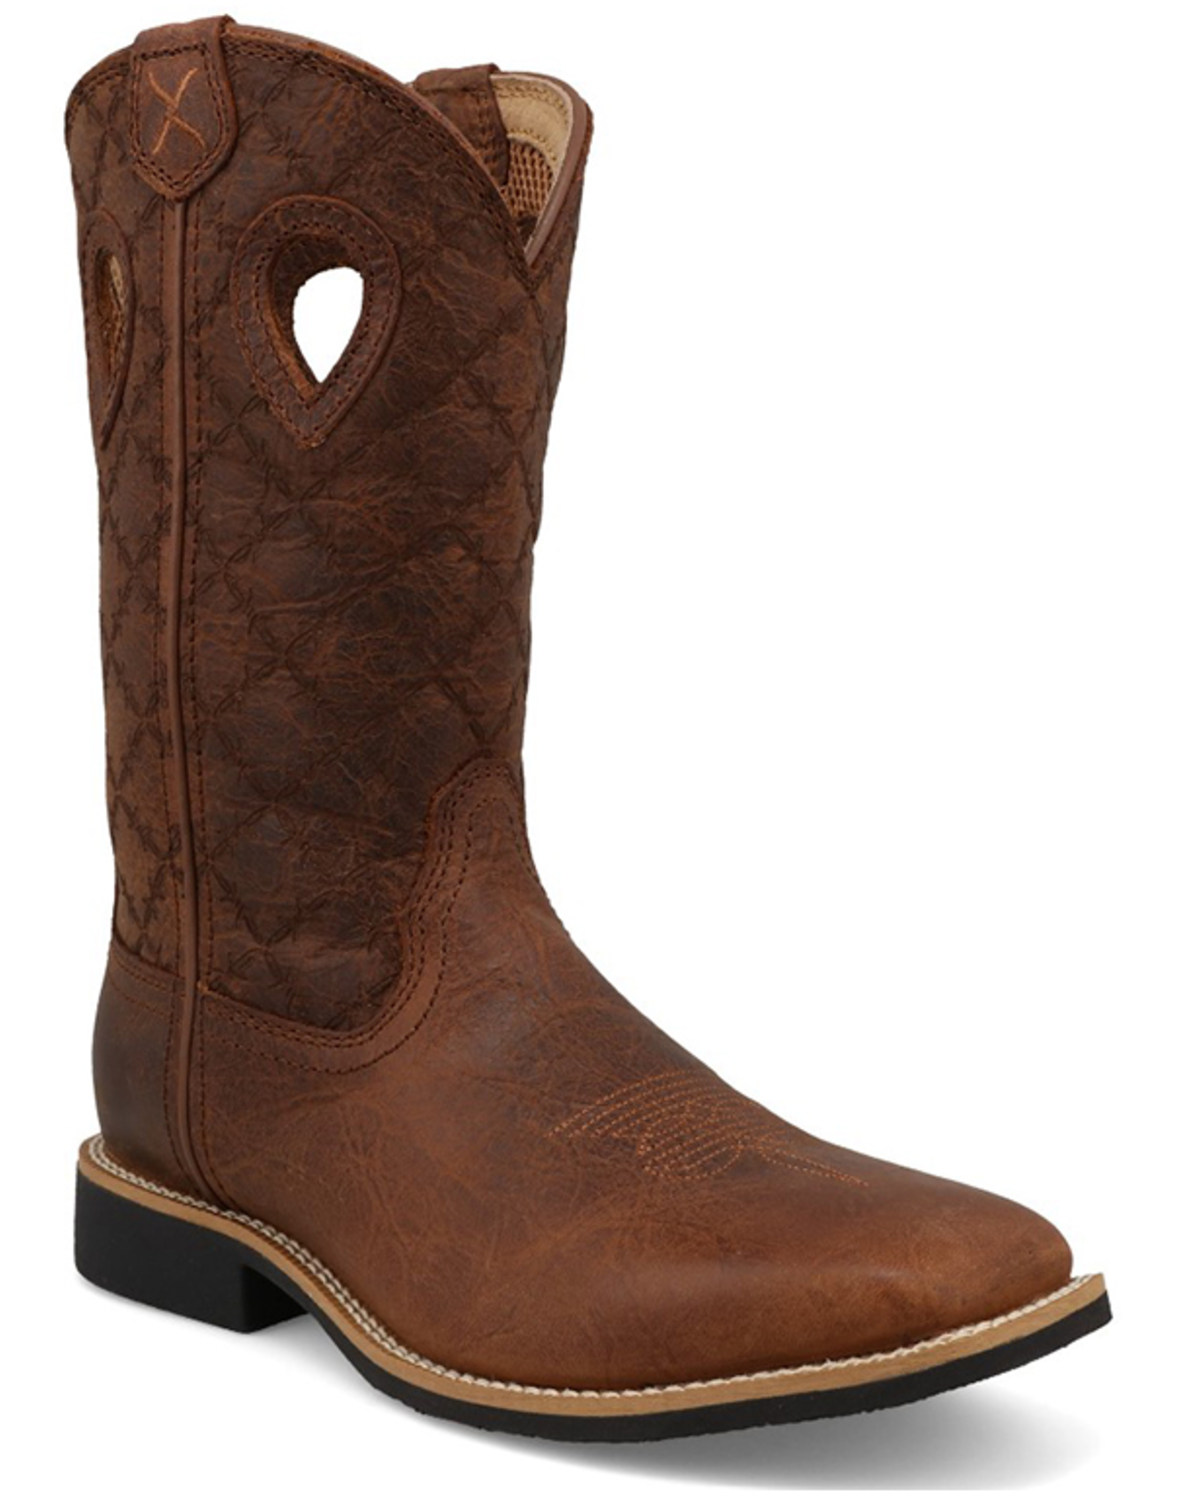 Twisted X Boys' Top Hand Western Boots - Broad Square Toe